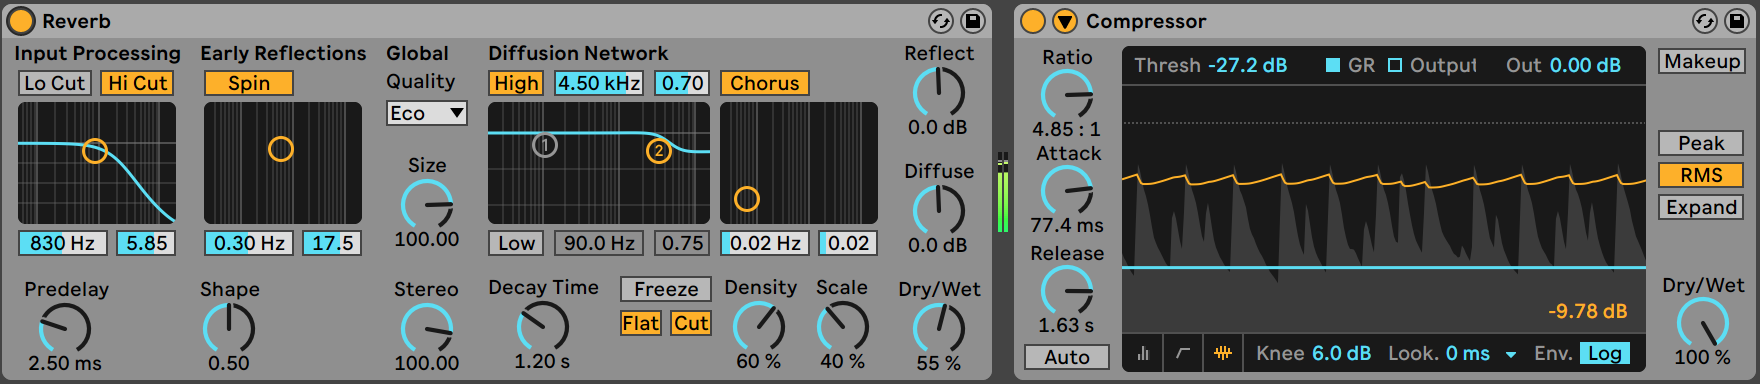 7 Essential Tips for Reverb_2.1.png